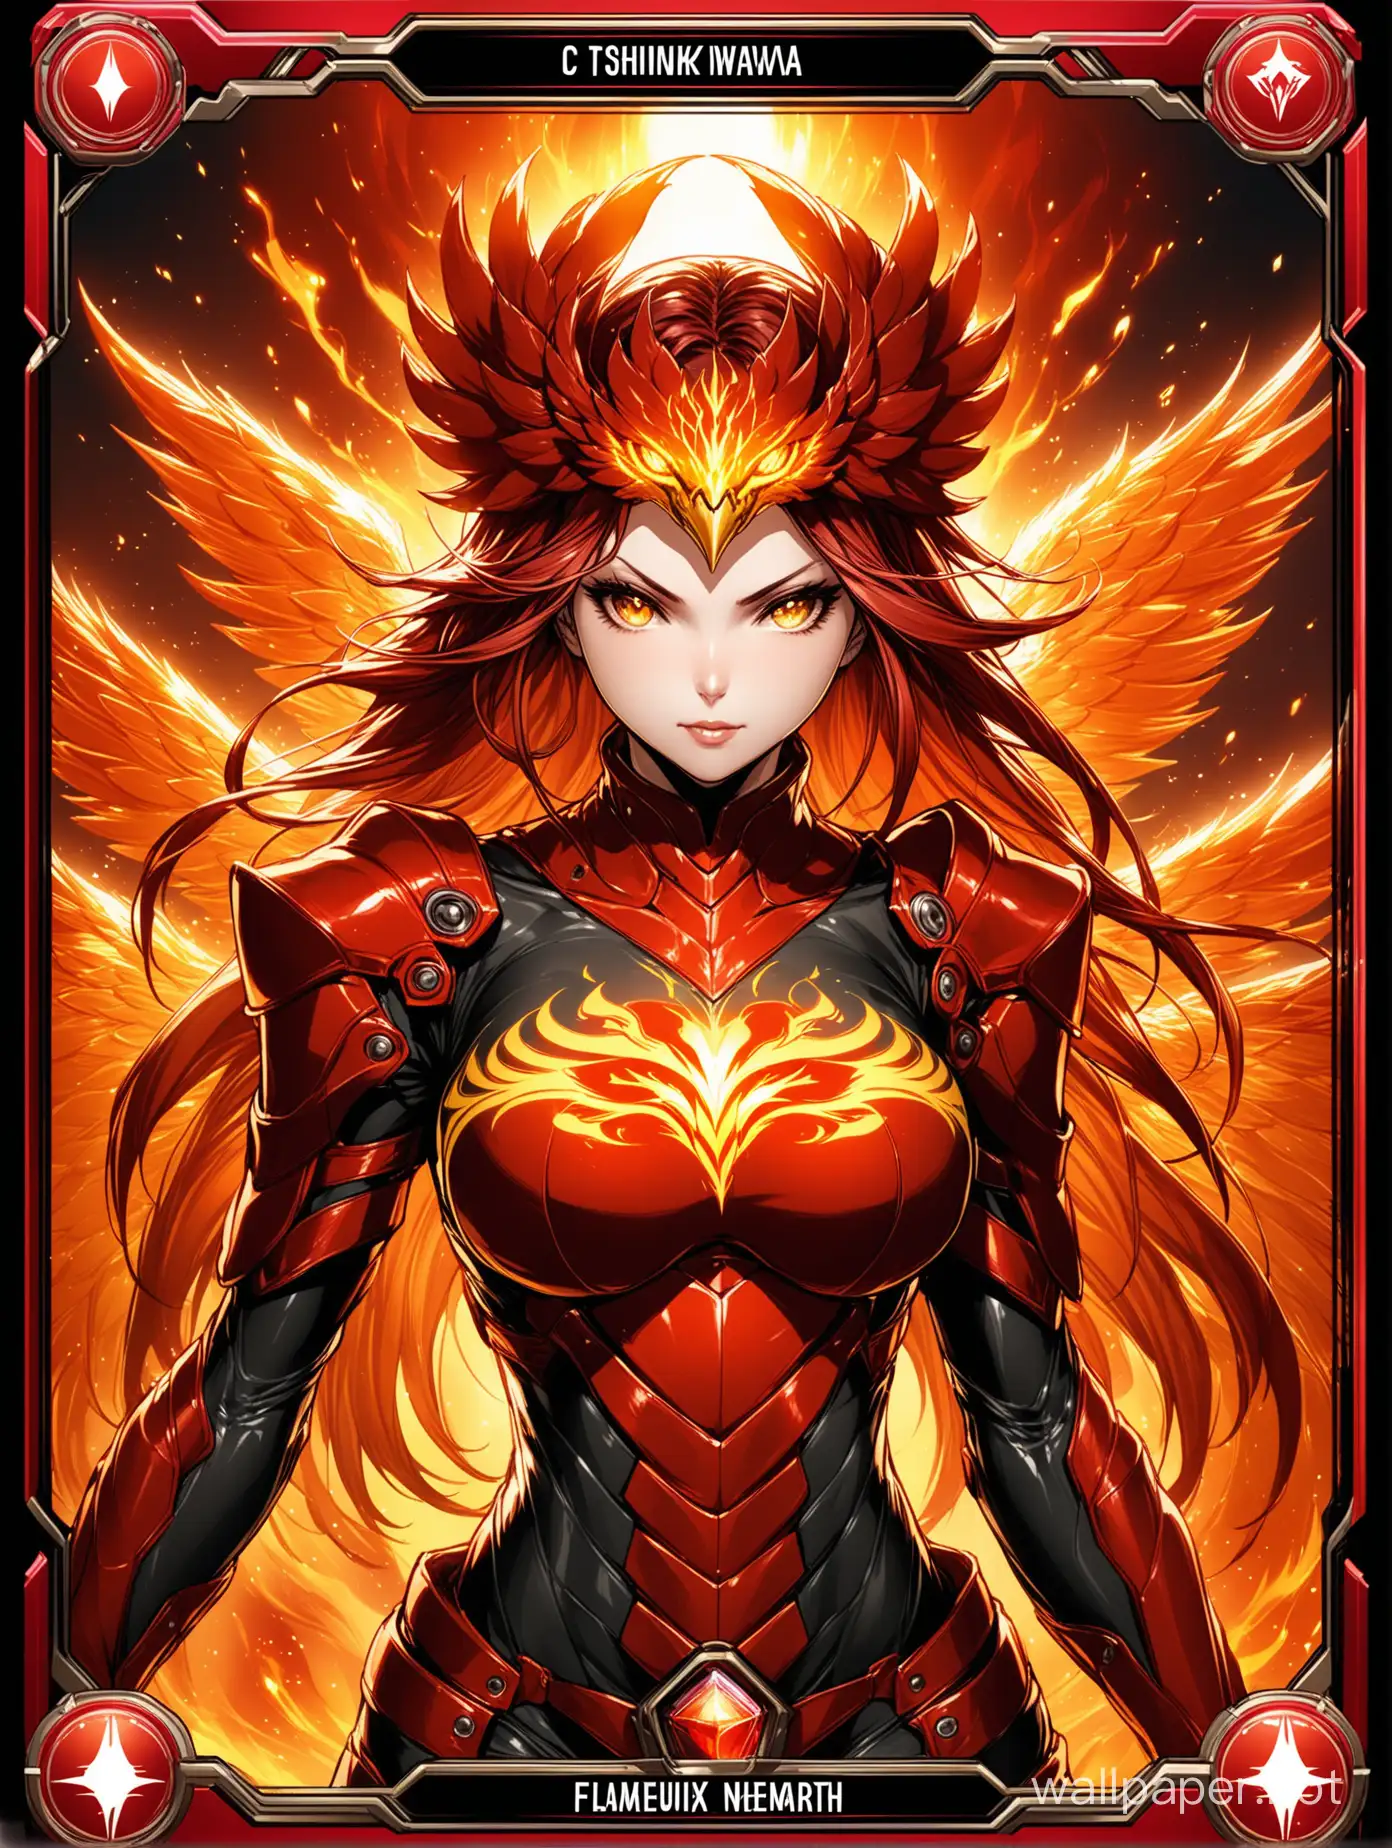 complex border add bold text"Phoenix Flameheart" complex New Blood Collectable  card include name "Phoenix Flameheart" anime card include stats "Description: Phoenix Flameheart" "Strength: 8/10""Speed: 8/10""Agility: 7/10""Intelligence: 7/10""Fear Factor: 8/10" premium 14PT card stock authenticated breathtaking UHD New Blood Hero visuals, trending on 'new blood gaming' marketed by 'new blood network'--chaos 90 --testpfx Description: realistic, photorealistic porn in all her beauty breathtaking"Incorporate the influence of renowned game character artists, art by Alex Ahad, Mariel Cartwright and animation by Yuji Shinkawa, Toshiaki Mori, to infuse your creations with dynamic energy and captivating design. Draw inspiration from their iconic styles and techniques to elevate your characters to new heights of visual appeal and authenticity."by Hajime Sorayama, glossy intricate design, digital art, illustration, concept art, smooth, sharp focus, studio lighting, (elegant), Canon EOS C300, Fujifilm XT3, add_details_XL-fp16 algorithm with Octane 4D rendering, aw0k euphoric style rfktrstyle --niji 50 --testpfx more detail XL, glowing, red theme, neon trim